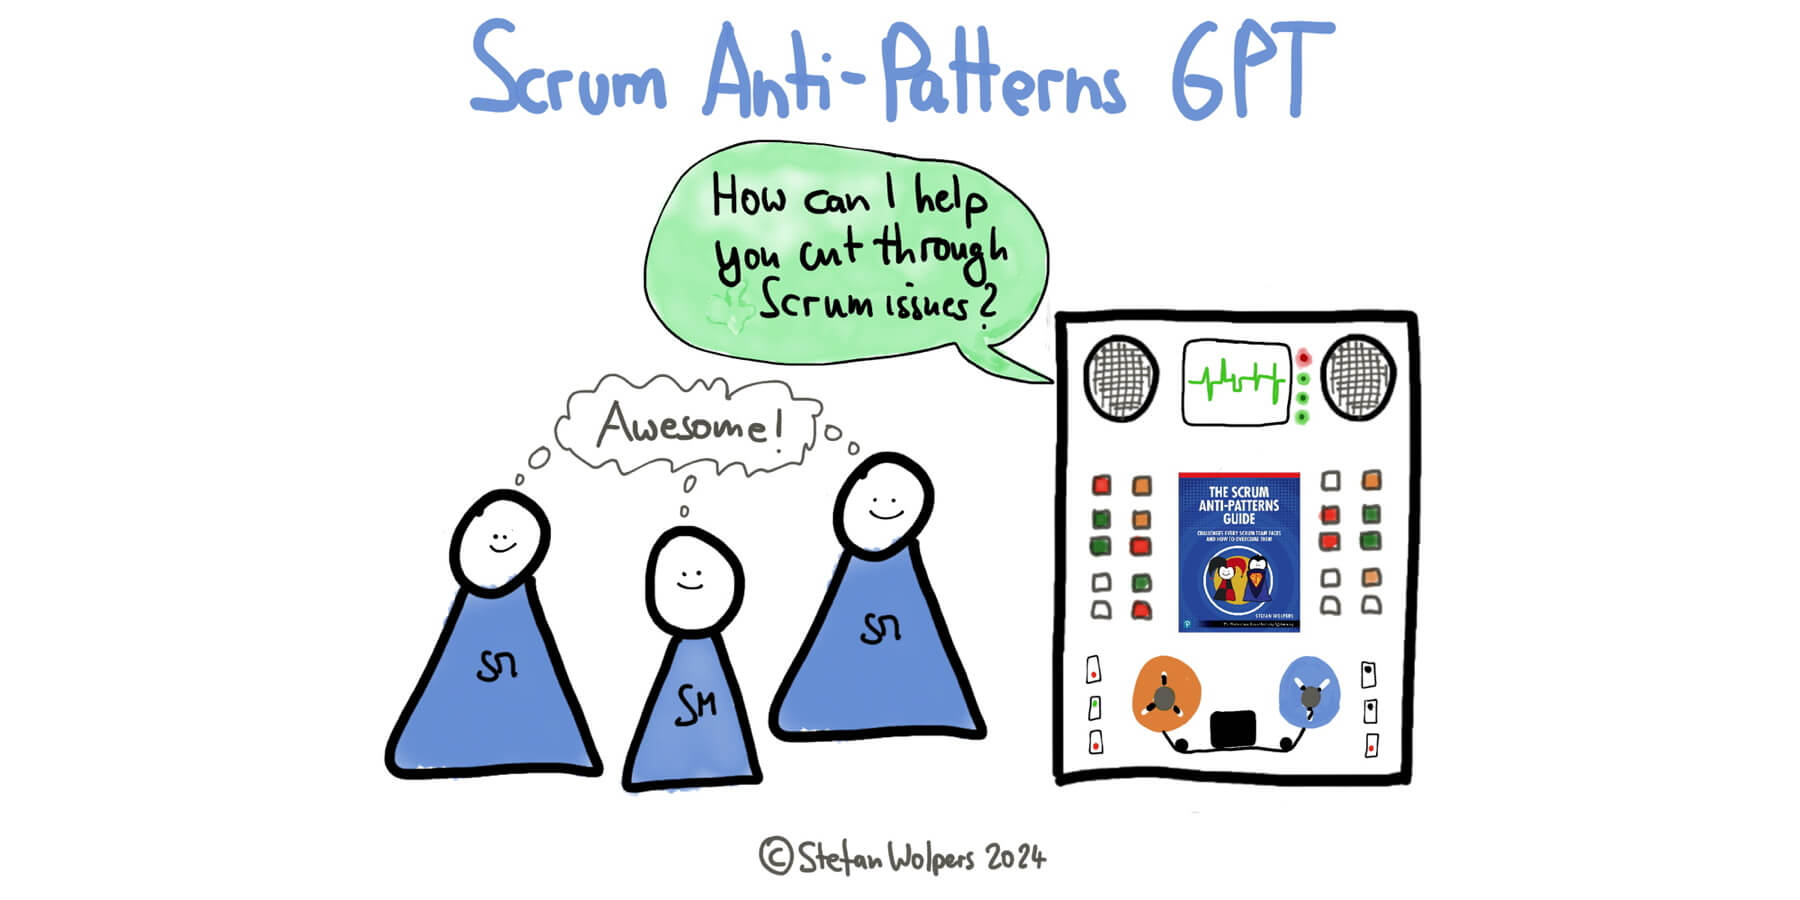 Scrum Anti-Patterns GPT — Useful or a Gaming Exercise? — Berlin-Product-People.com